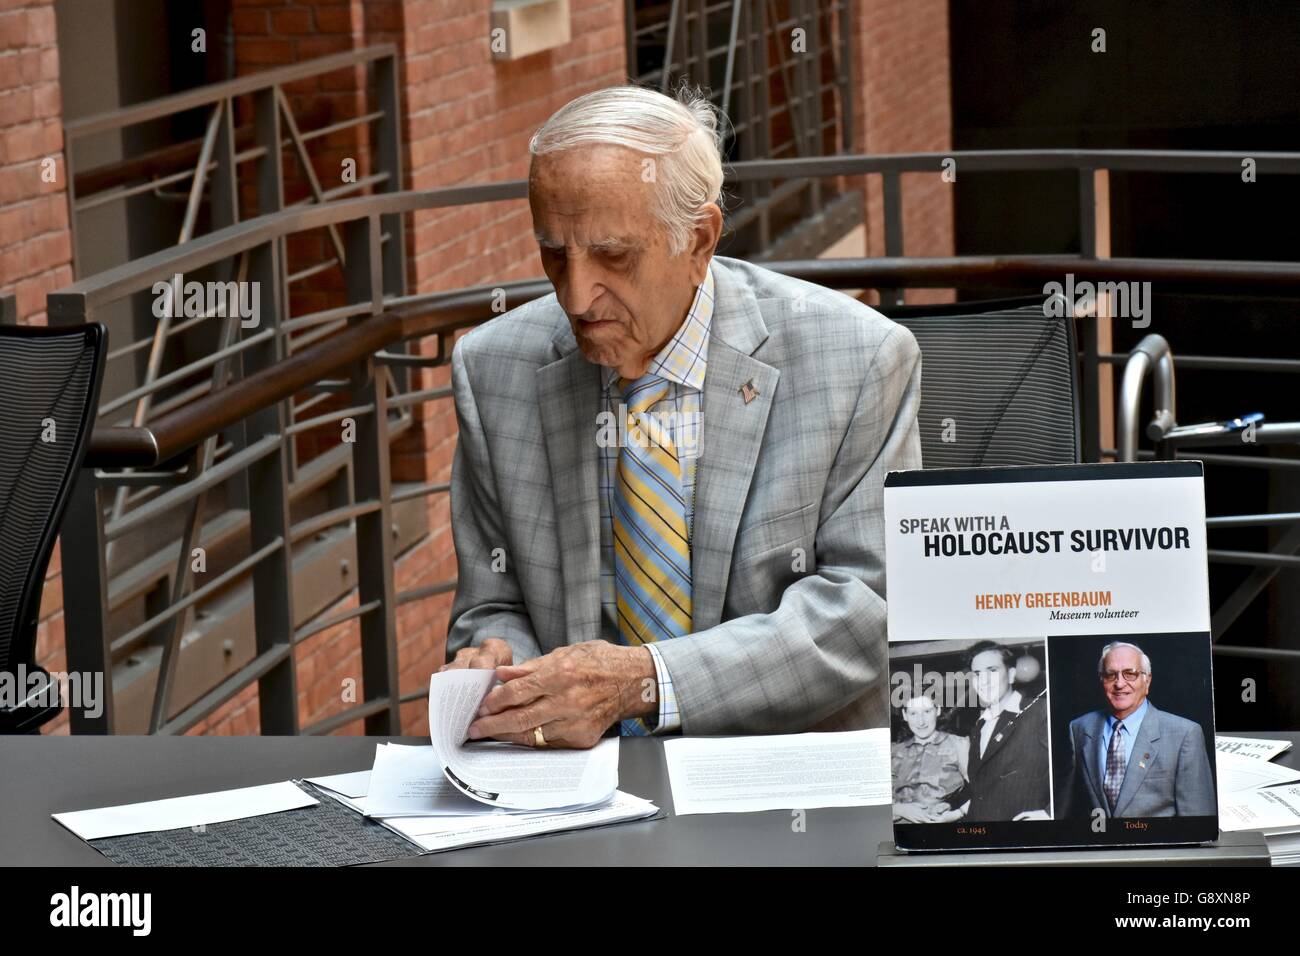 A survivor from the holocaust in Germany signing autographs and handing out his book at the holocaust museum in DC Stock Photo